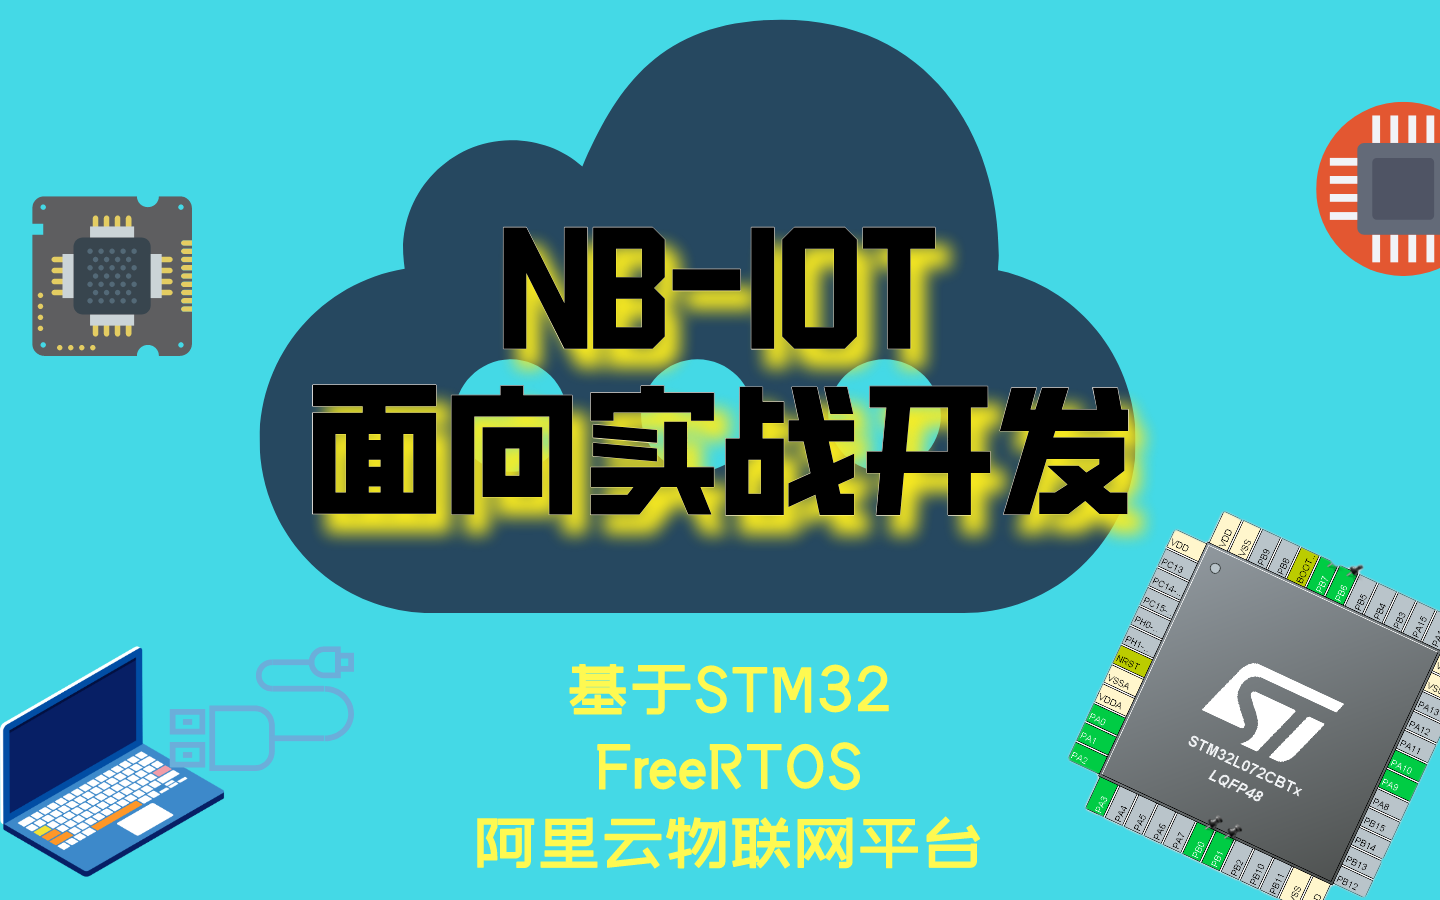  NB-IOT is combat oriented development based on stm32 and Freertos